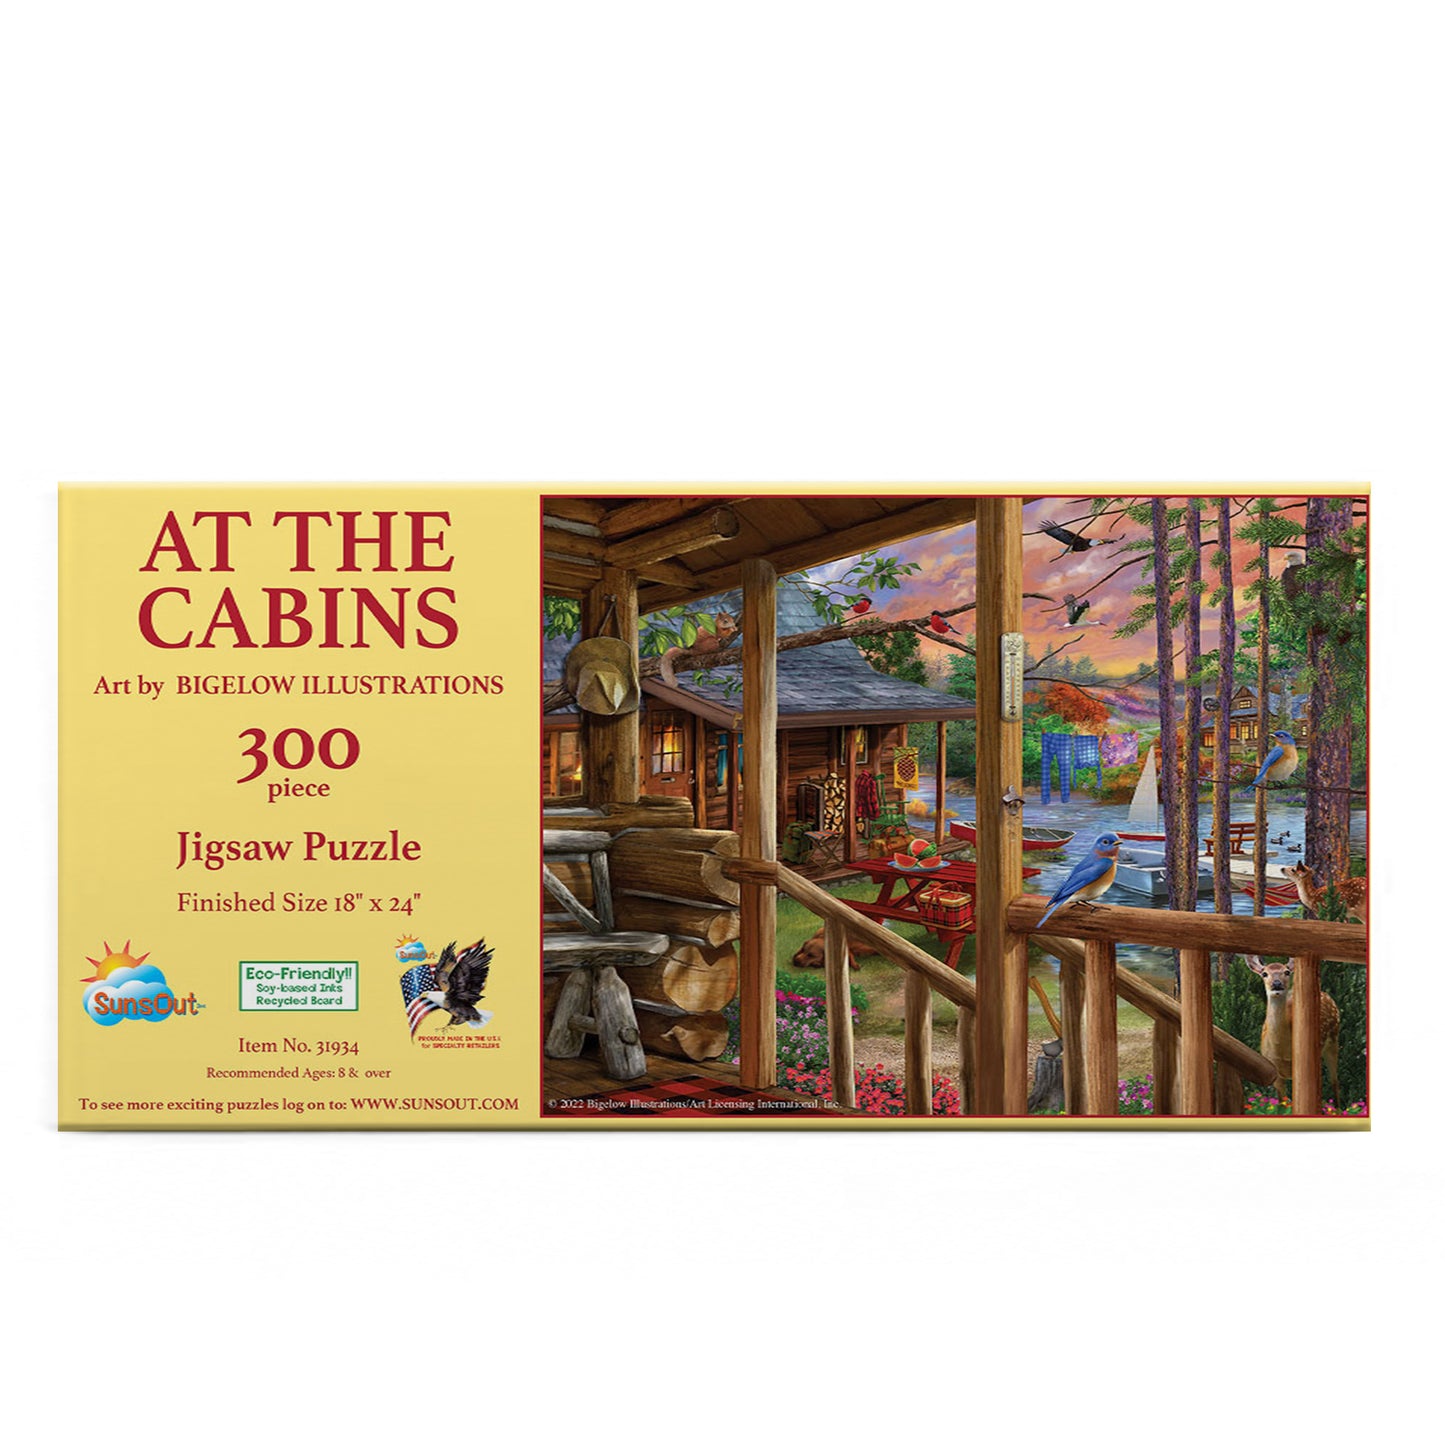 At The Cabins - 300 - 300 Piece Jigsaw Puzzle